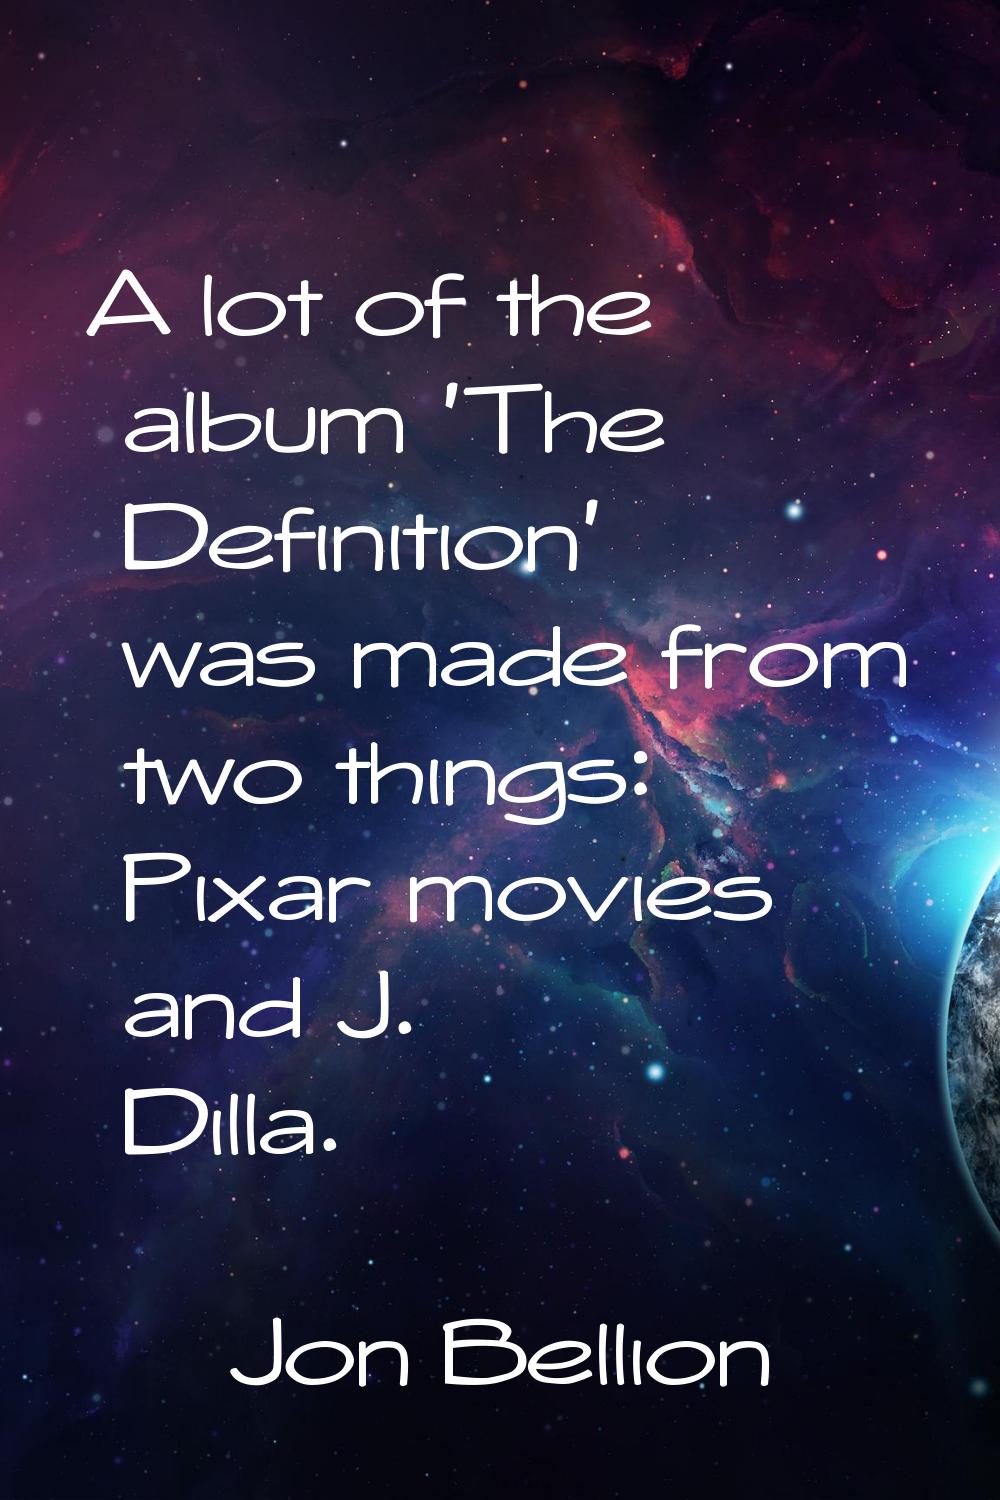 A lot of the album 'The Definition' was made from two things: Pixar movies and J. Dilla.